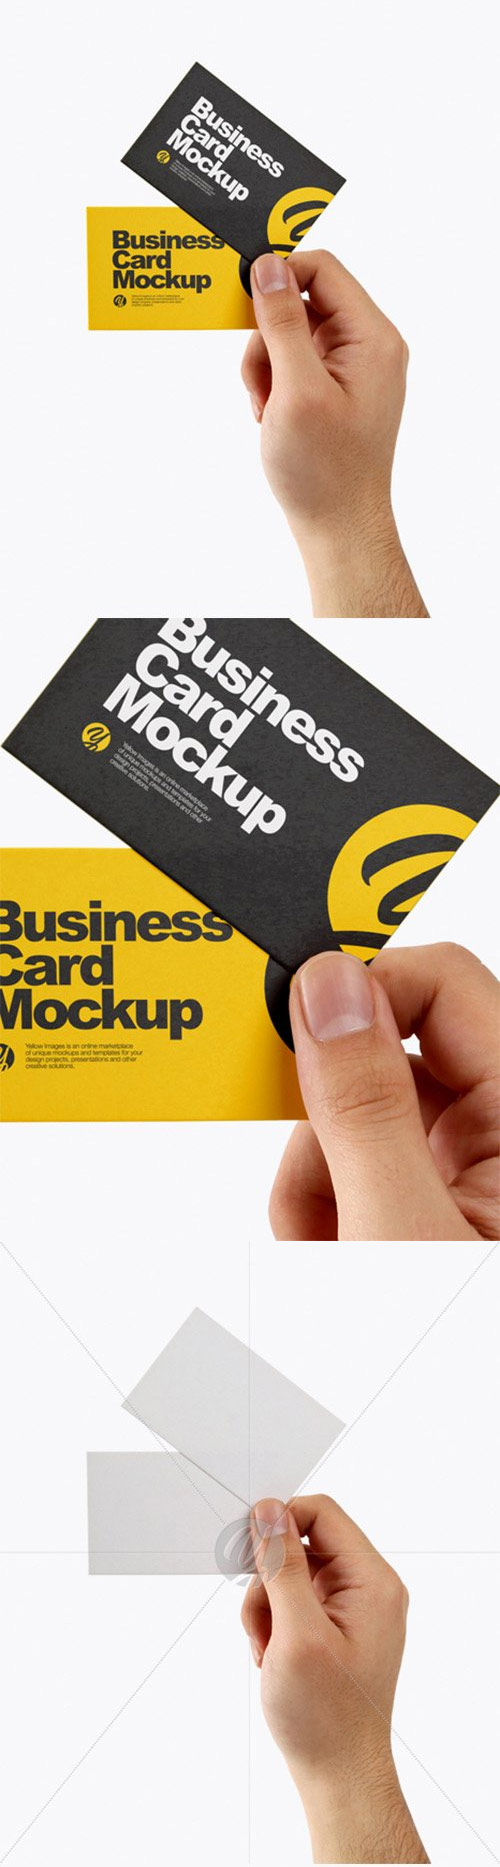 Business Cards in a Hand Mockup 24909